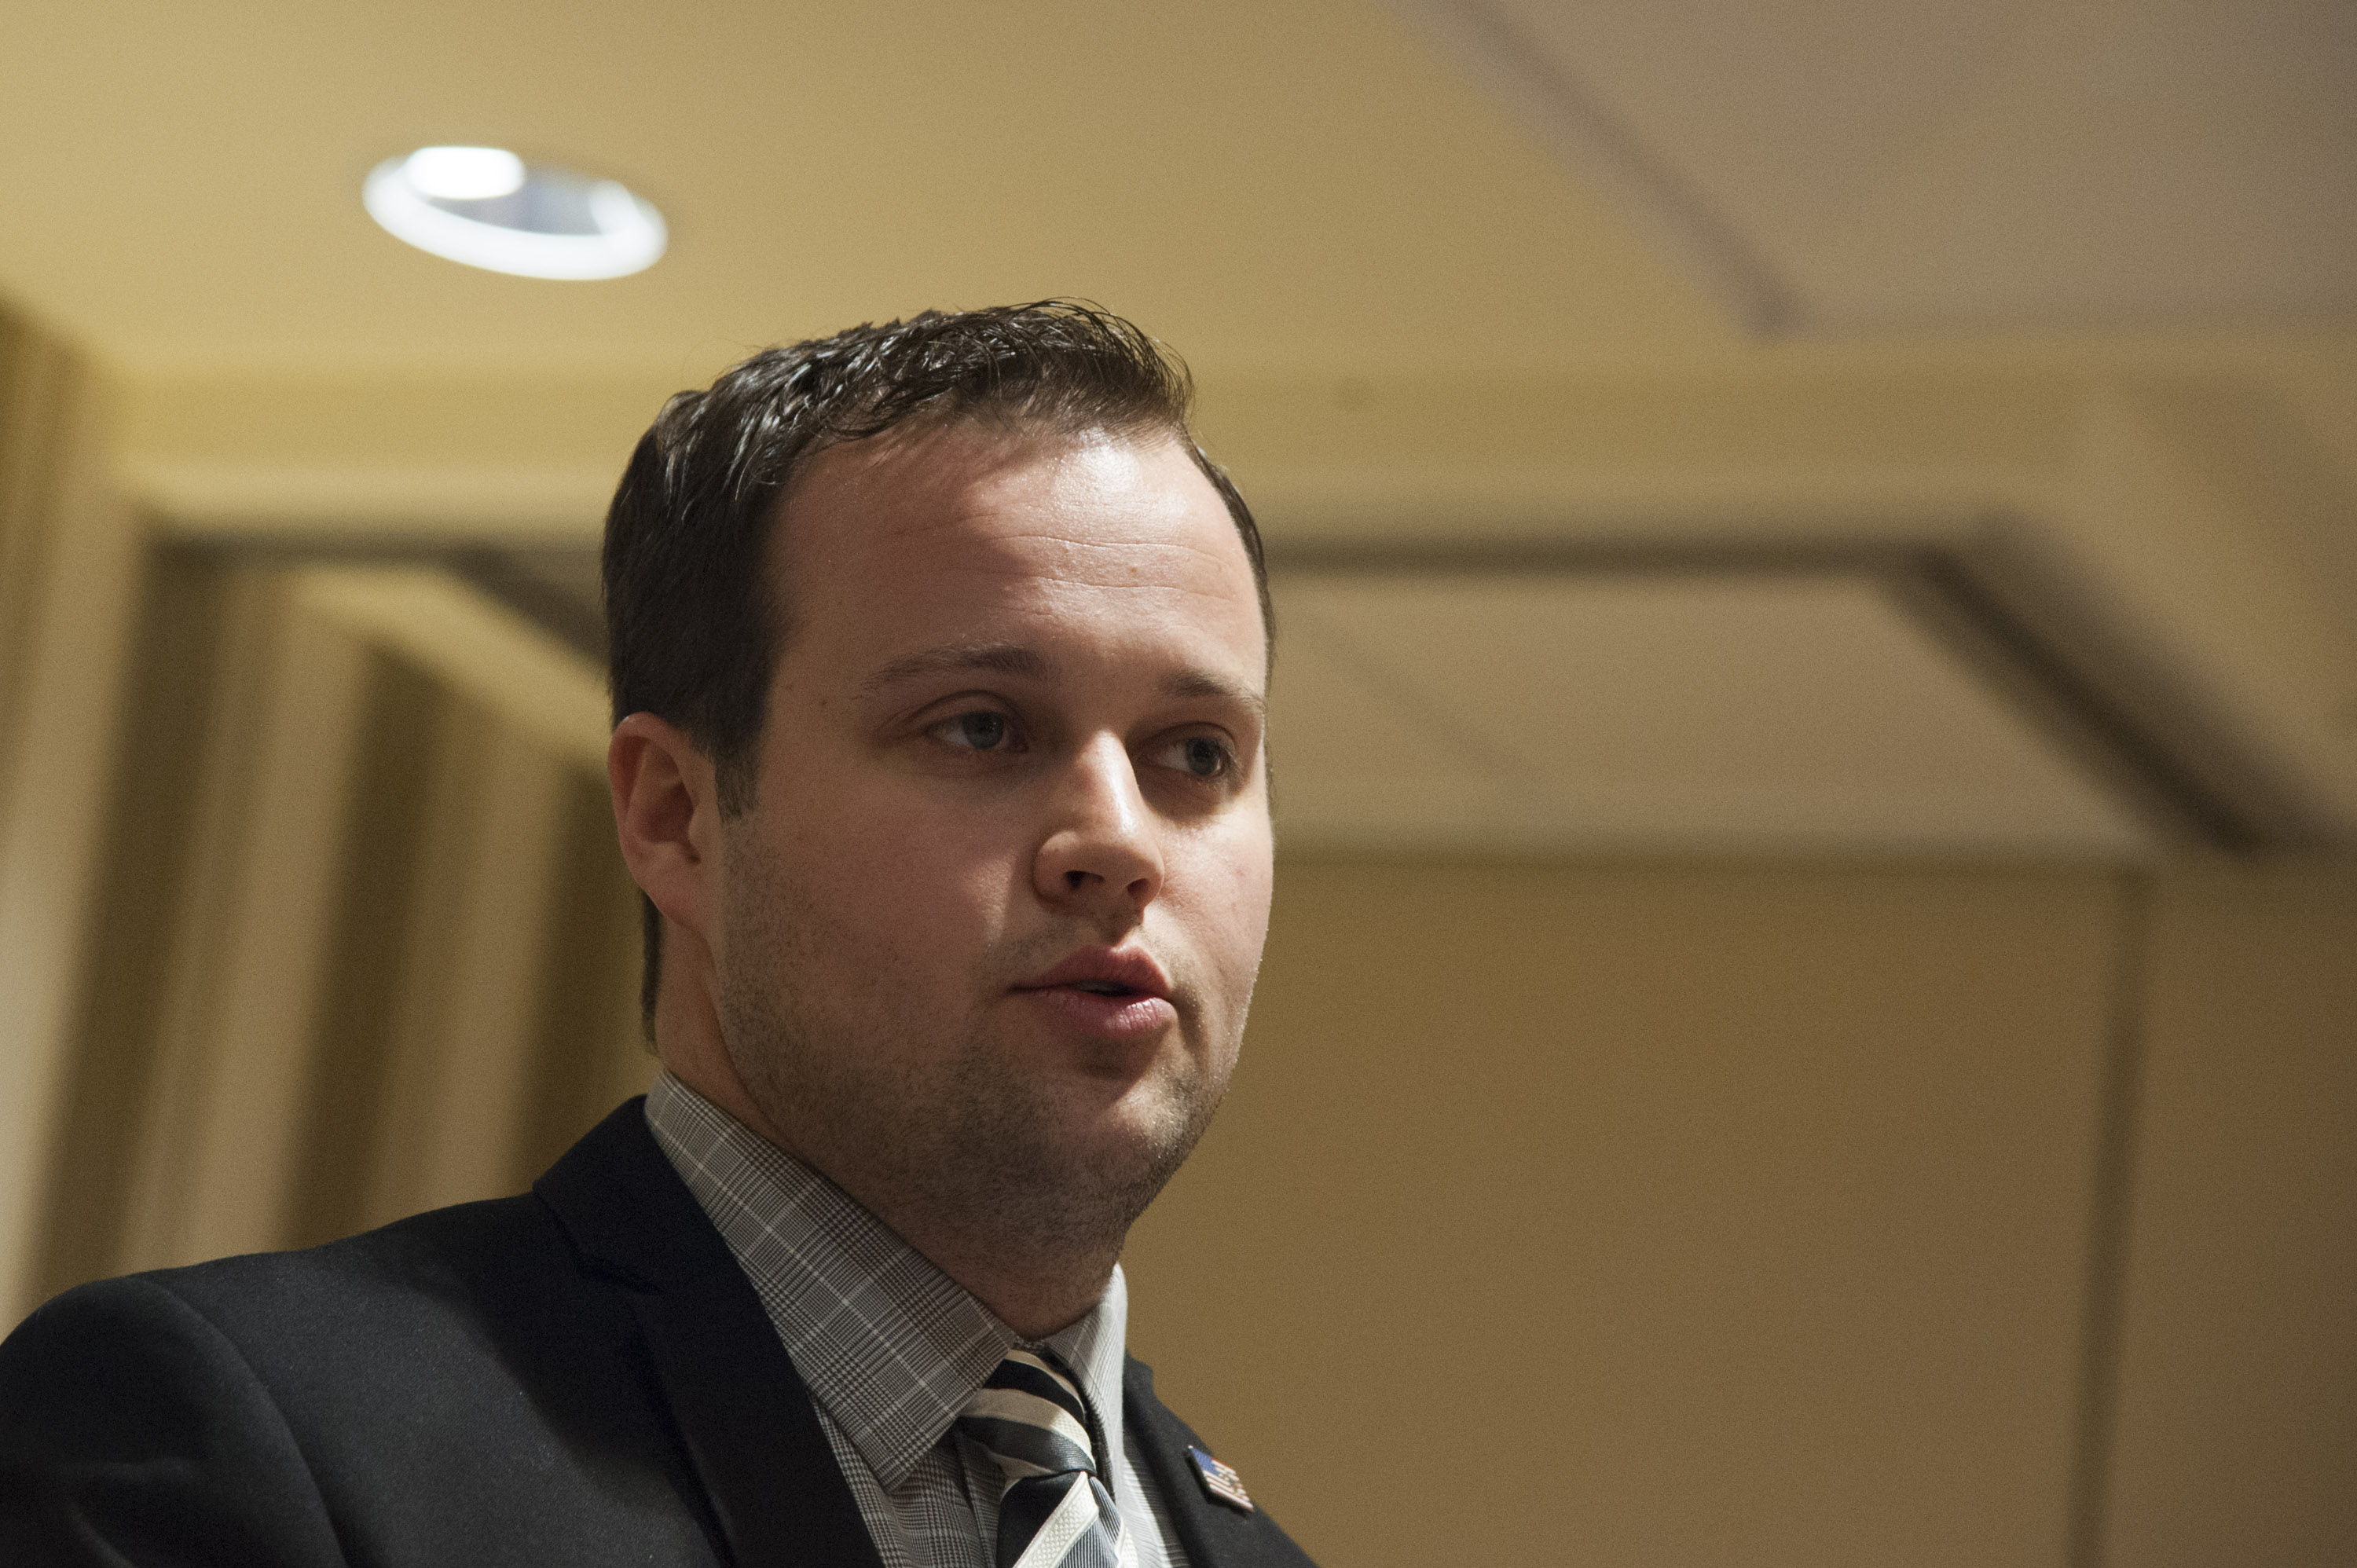 Josh Duggar speaks during the 42nd annual Conservative Political Action Conference (CPAC) at the Gaylord National Resort Hotel and Convention Center